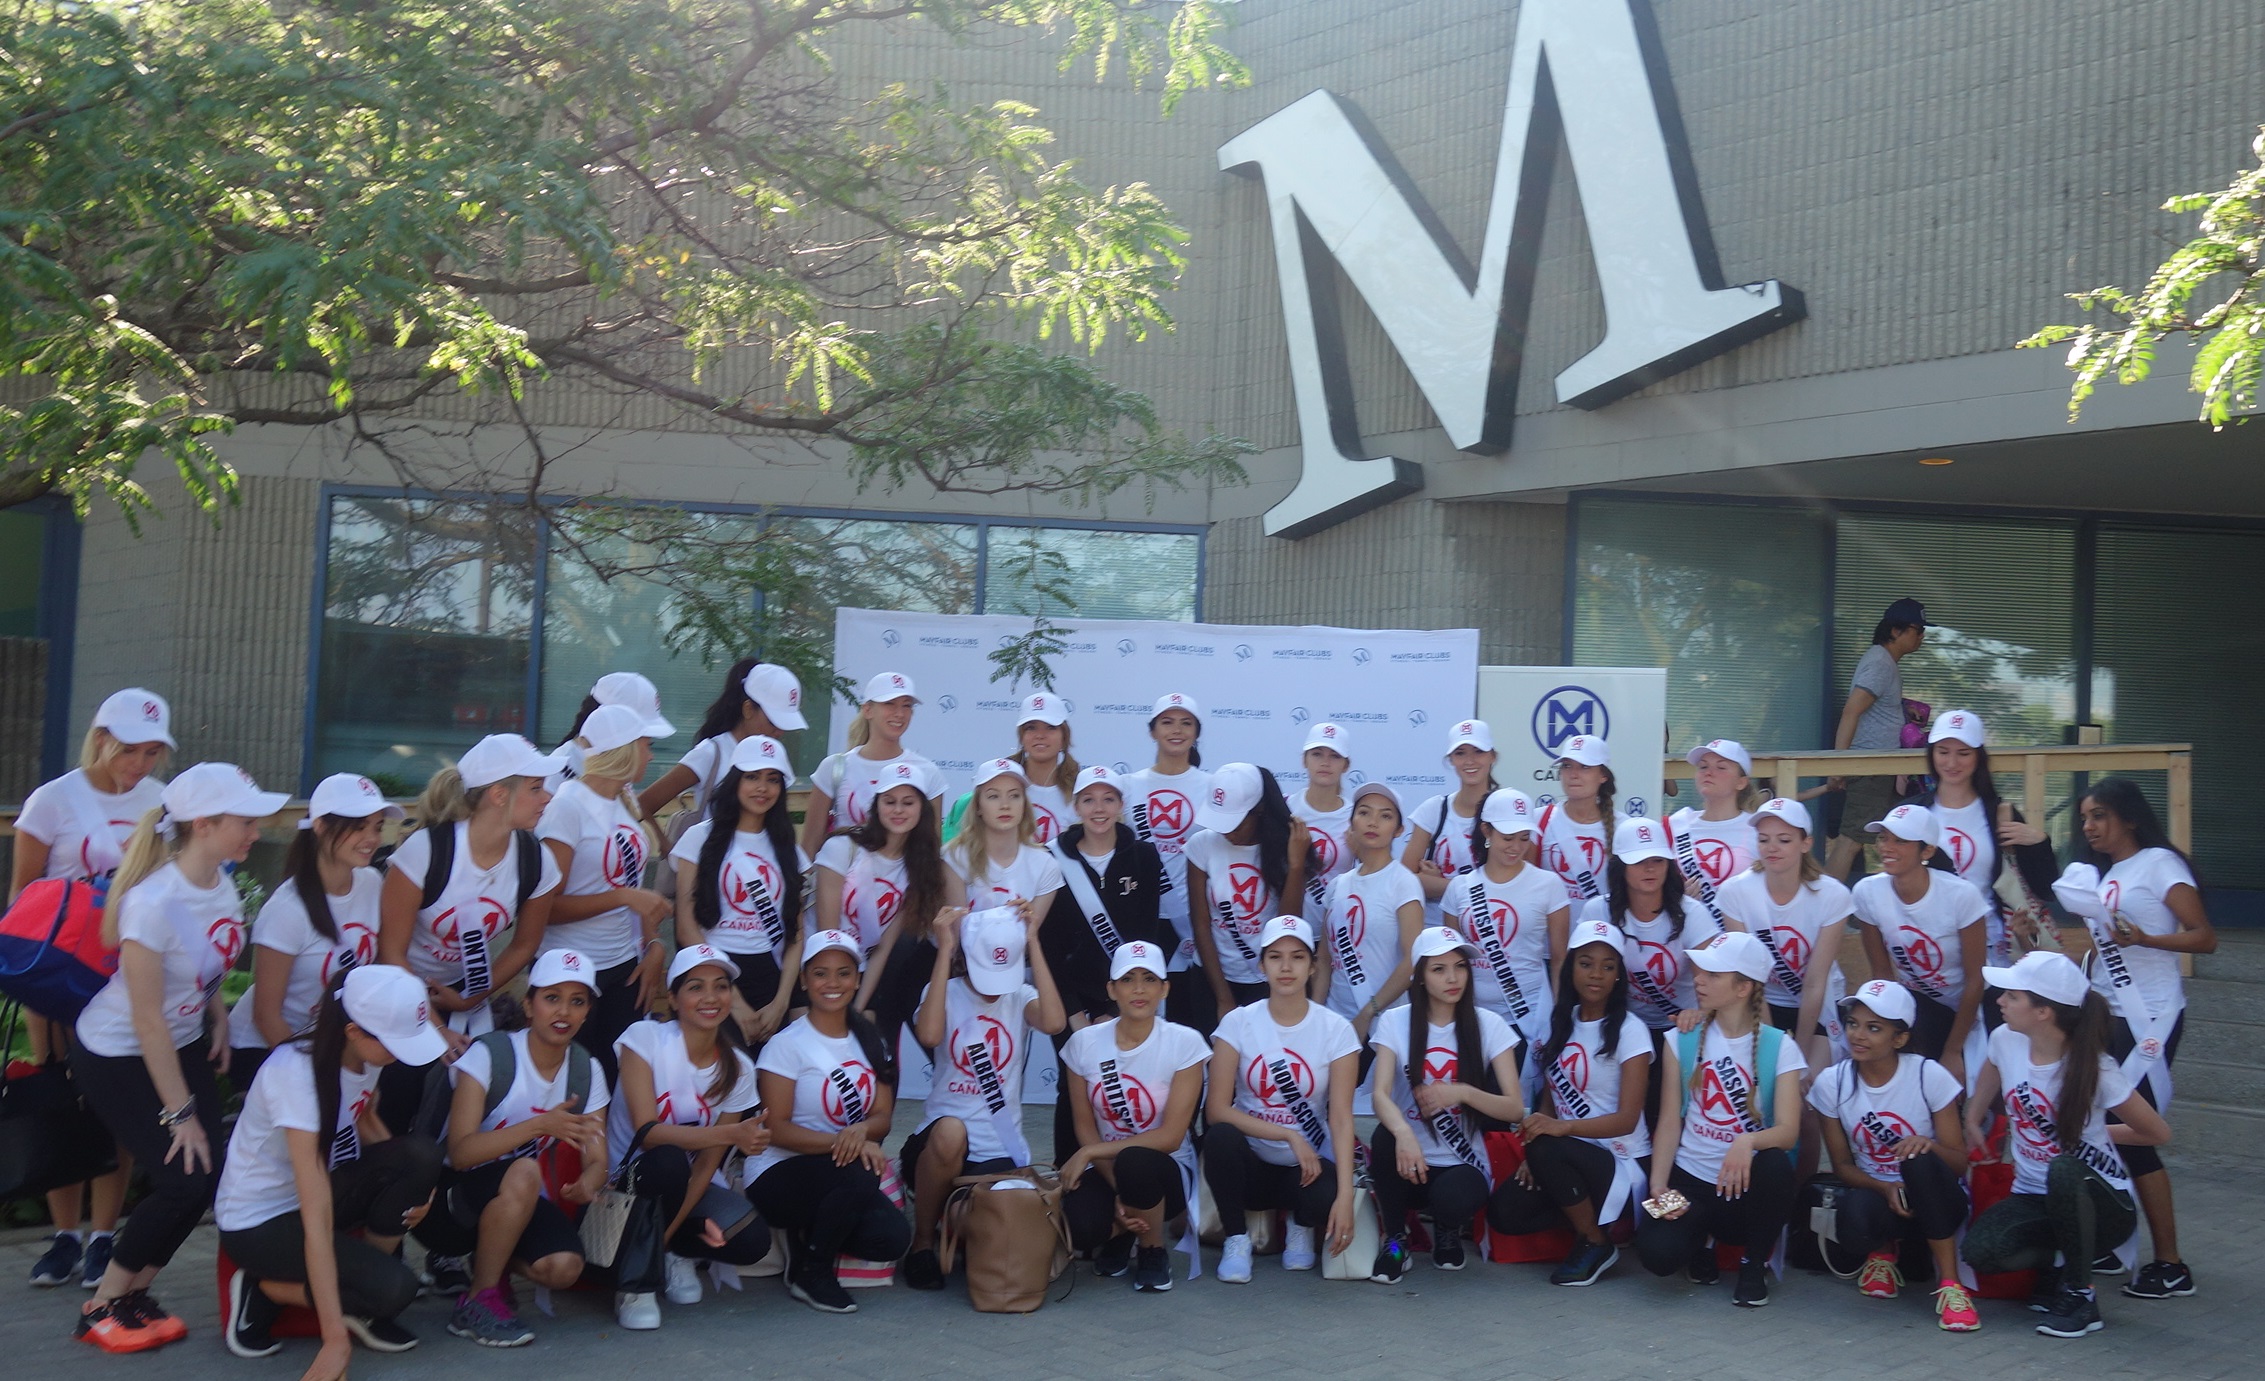 Miss World Canada, Fitness Day at Mayfair - Mayfair Clubs 